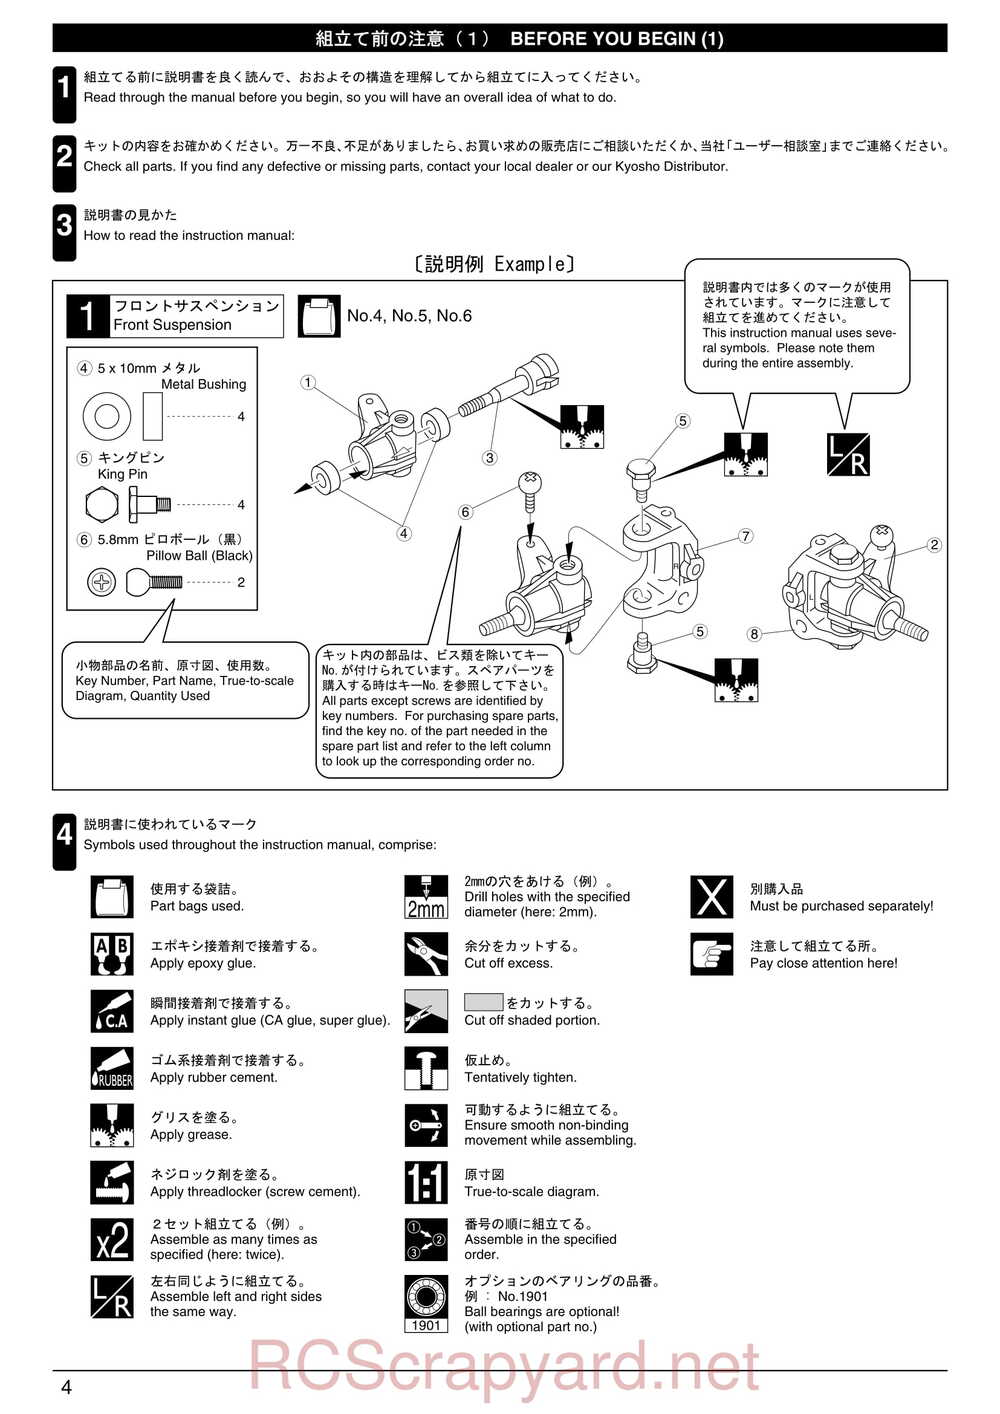 Kyosho - 31081- Inferno-MP-7-5 - Manual - Page 04